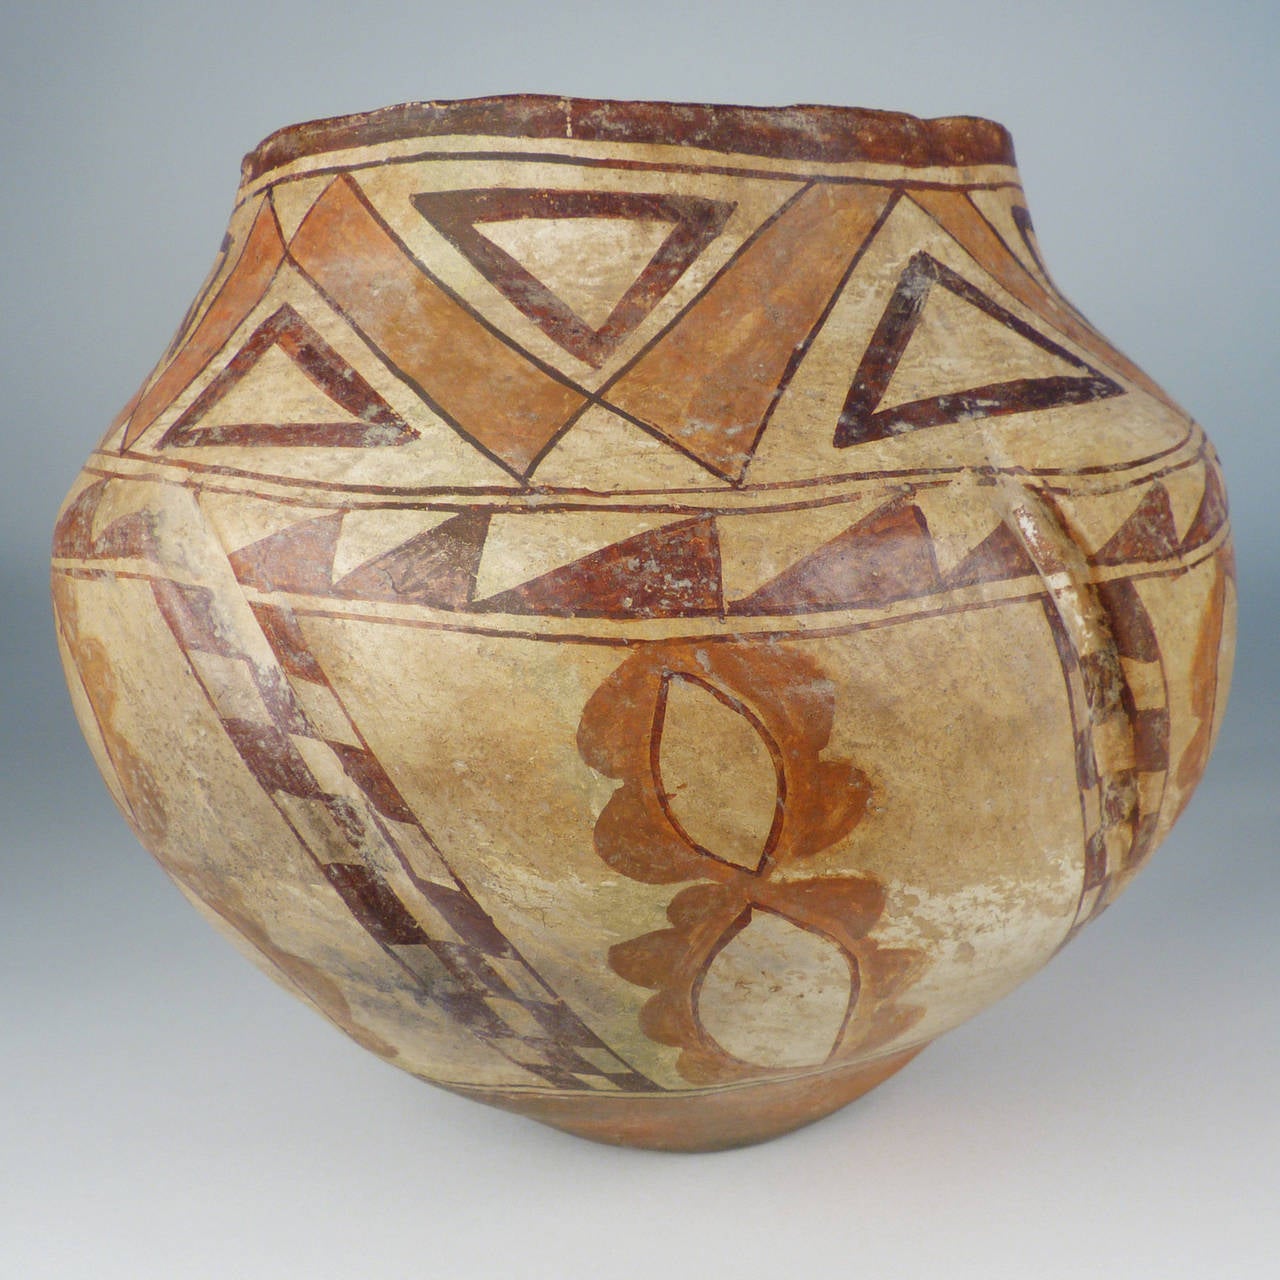 A traditionally made and fired pottery vessel from Laguna Pueblo in New Mexico. This is an exceptional piece with great patina and a highly unusual crimped form that echoes the winter squash grown in the gardens of Pueblo peoples. 9 1/4